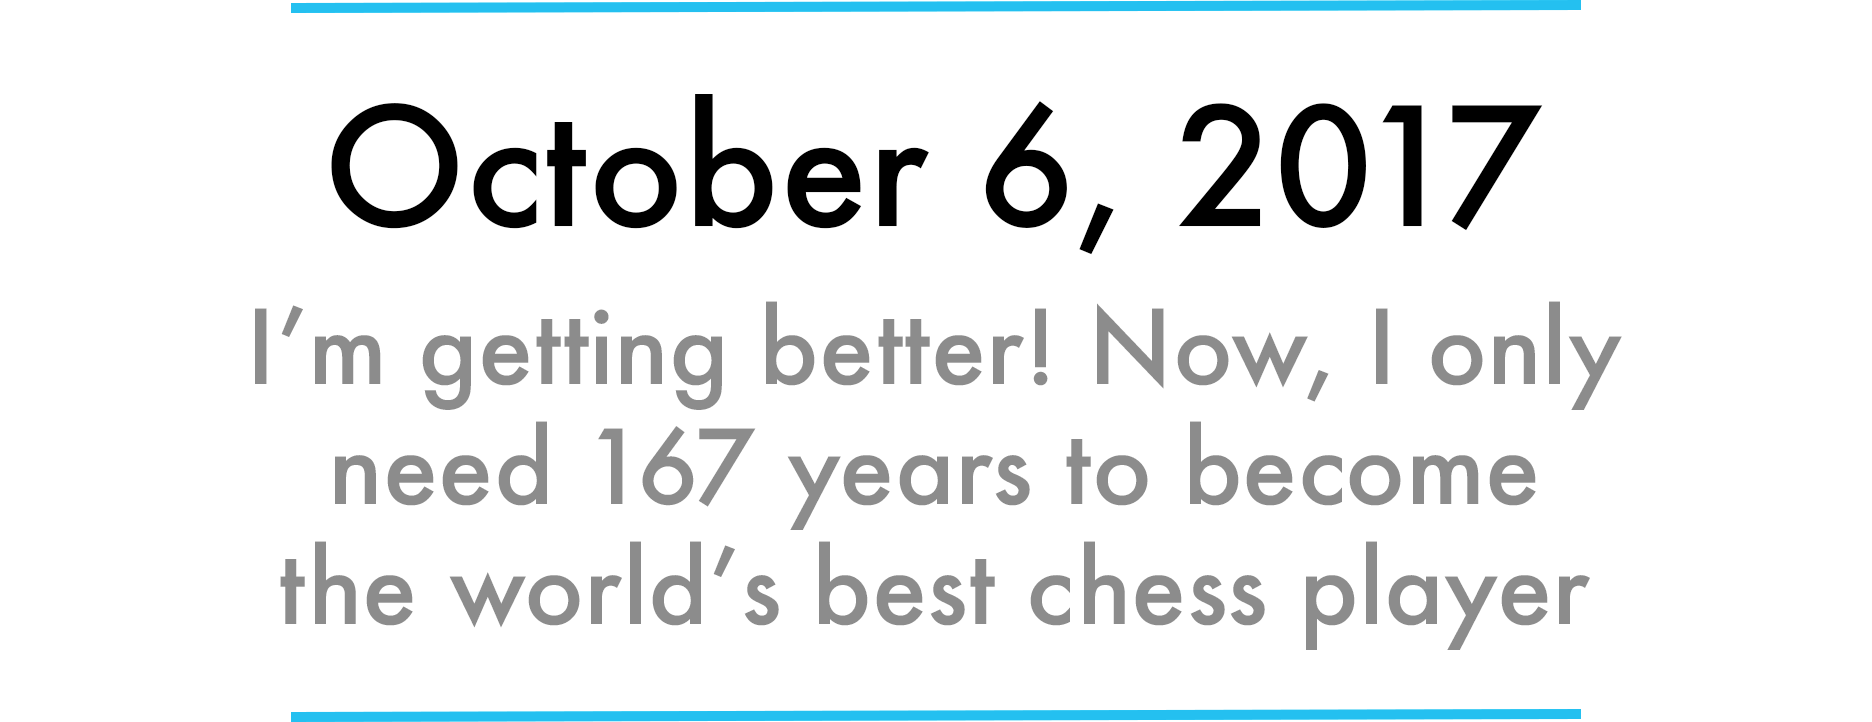 My month-long quest to become a chess master from scratch